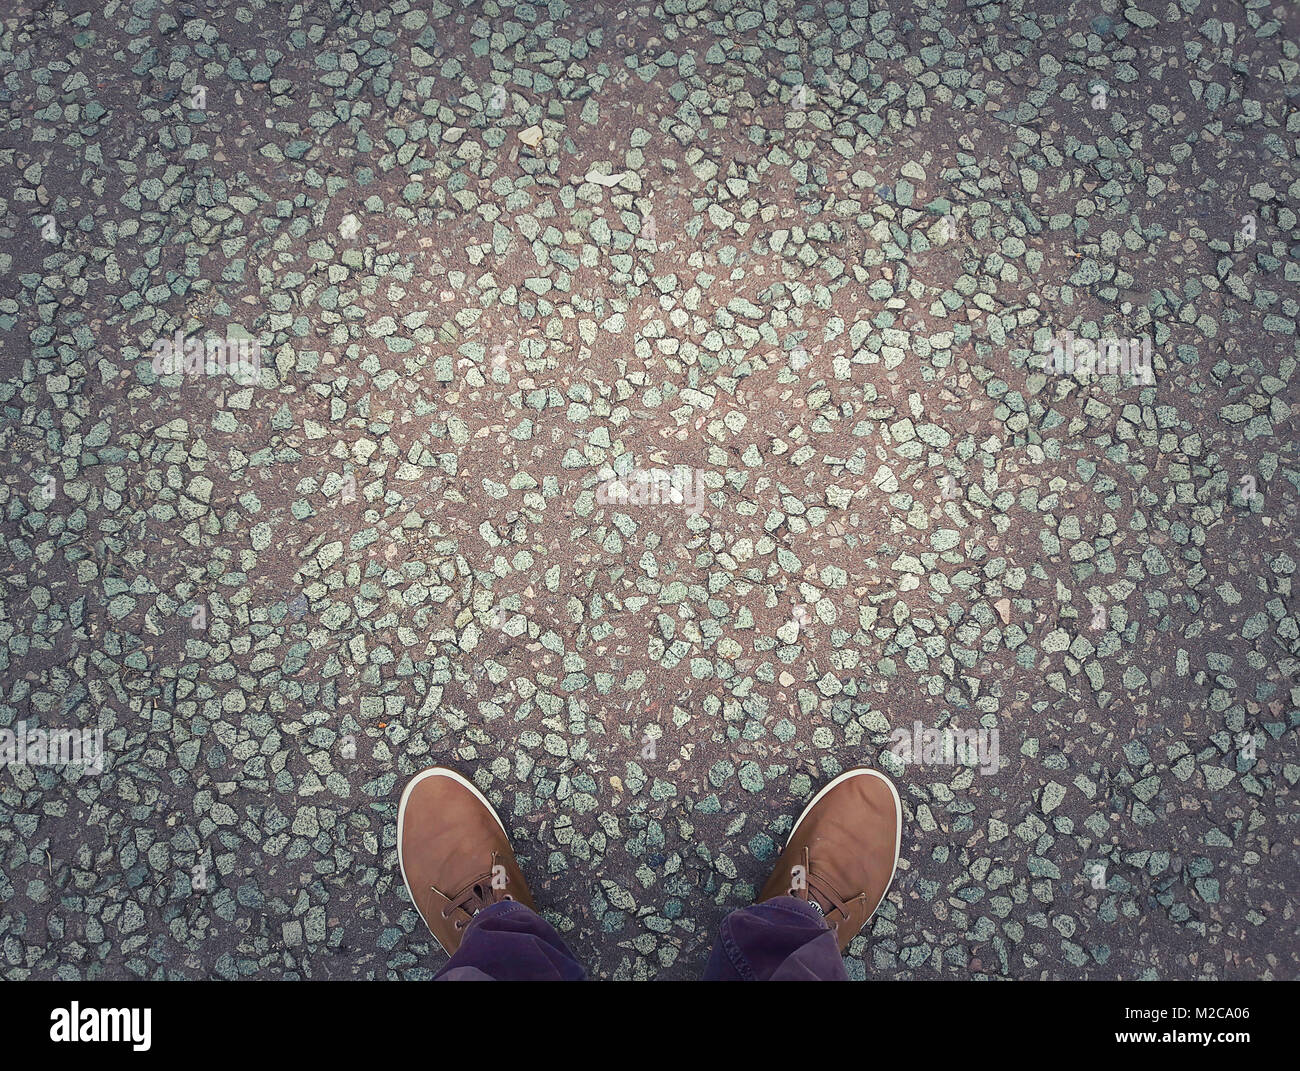 Man shoes on urban asphalt grunge background with copy space. Conceptual image of legs in boots outdoor on city street. Stock Photo